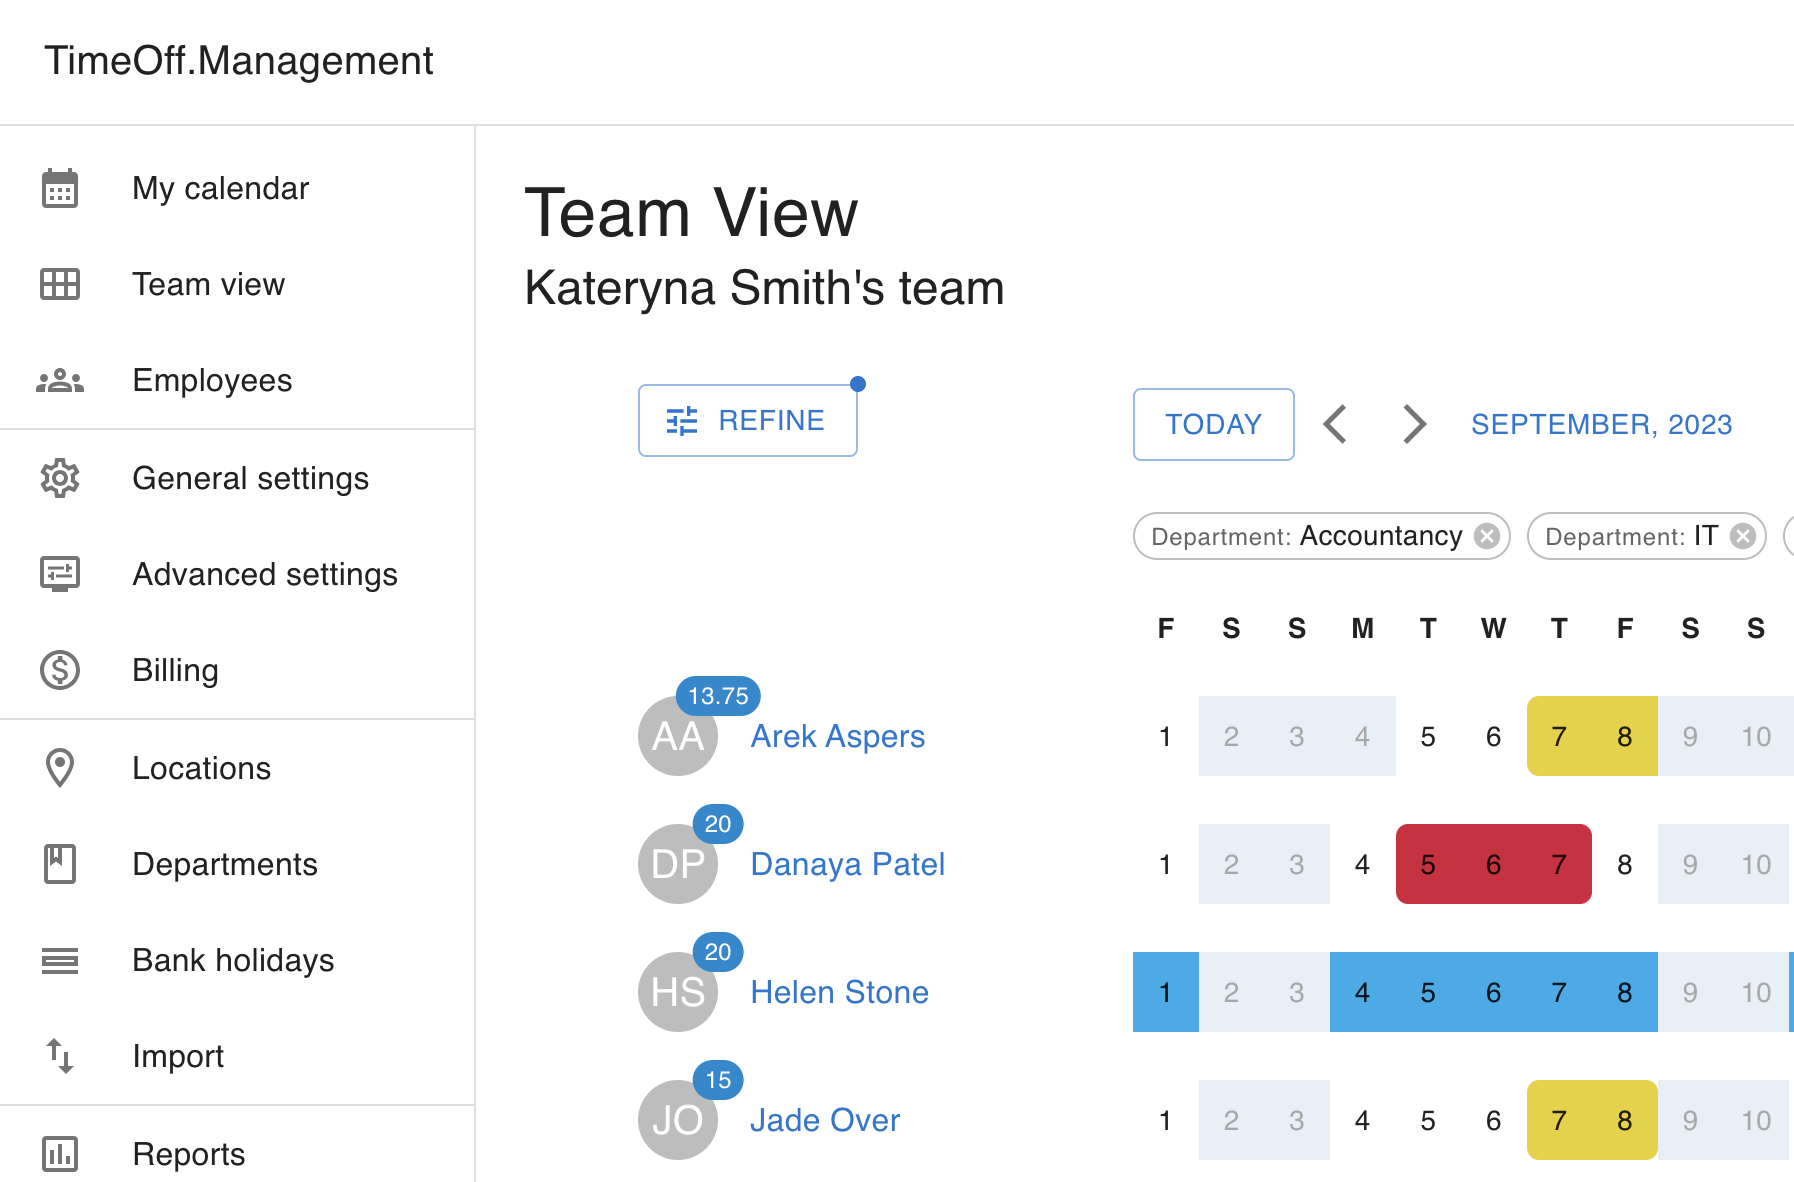 Team View page at TimeOff.management